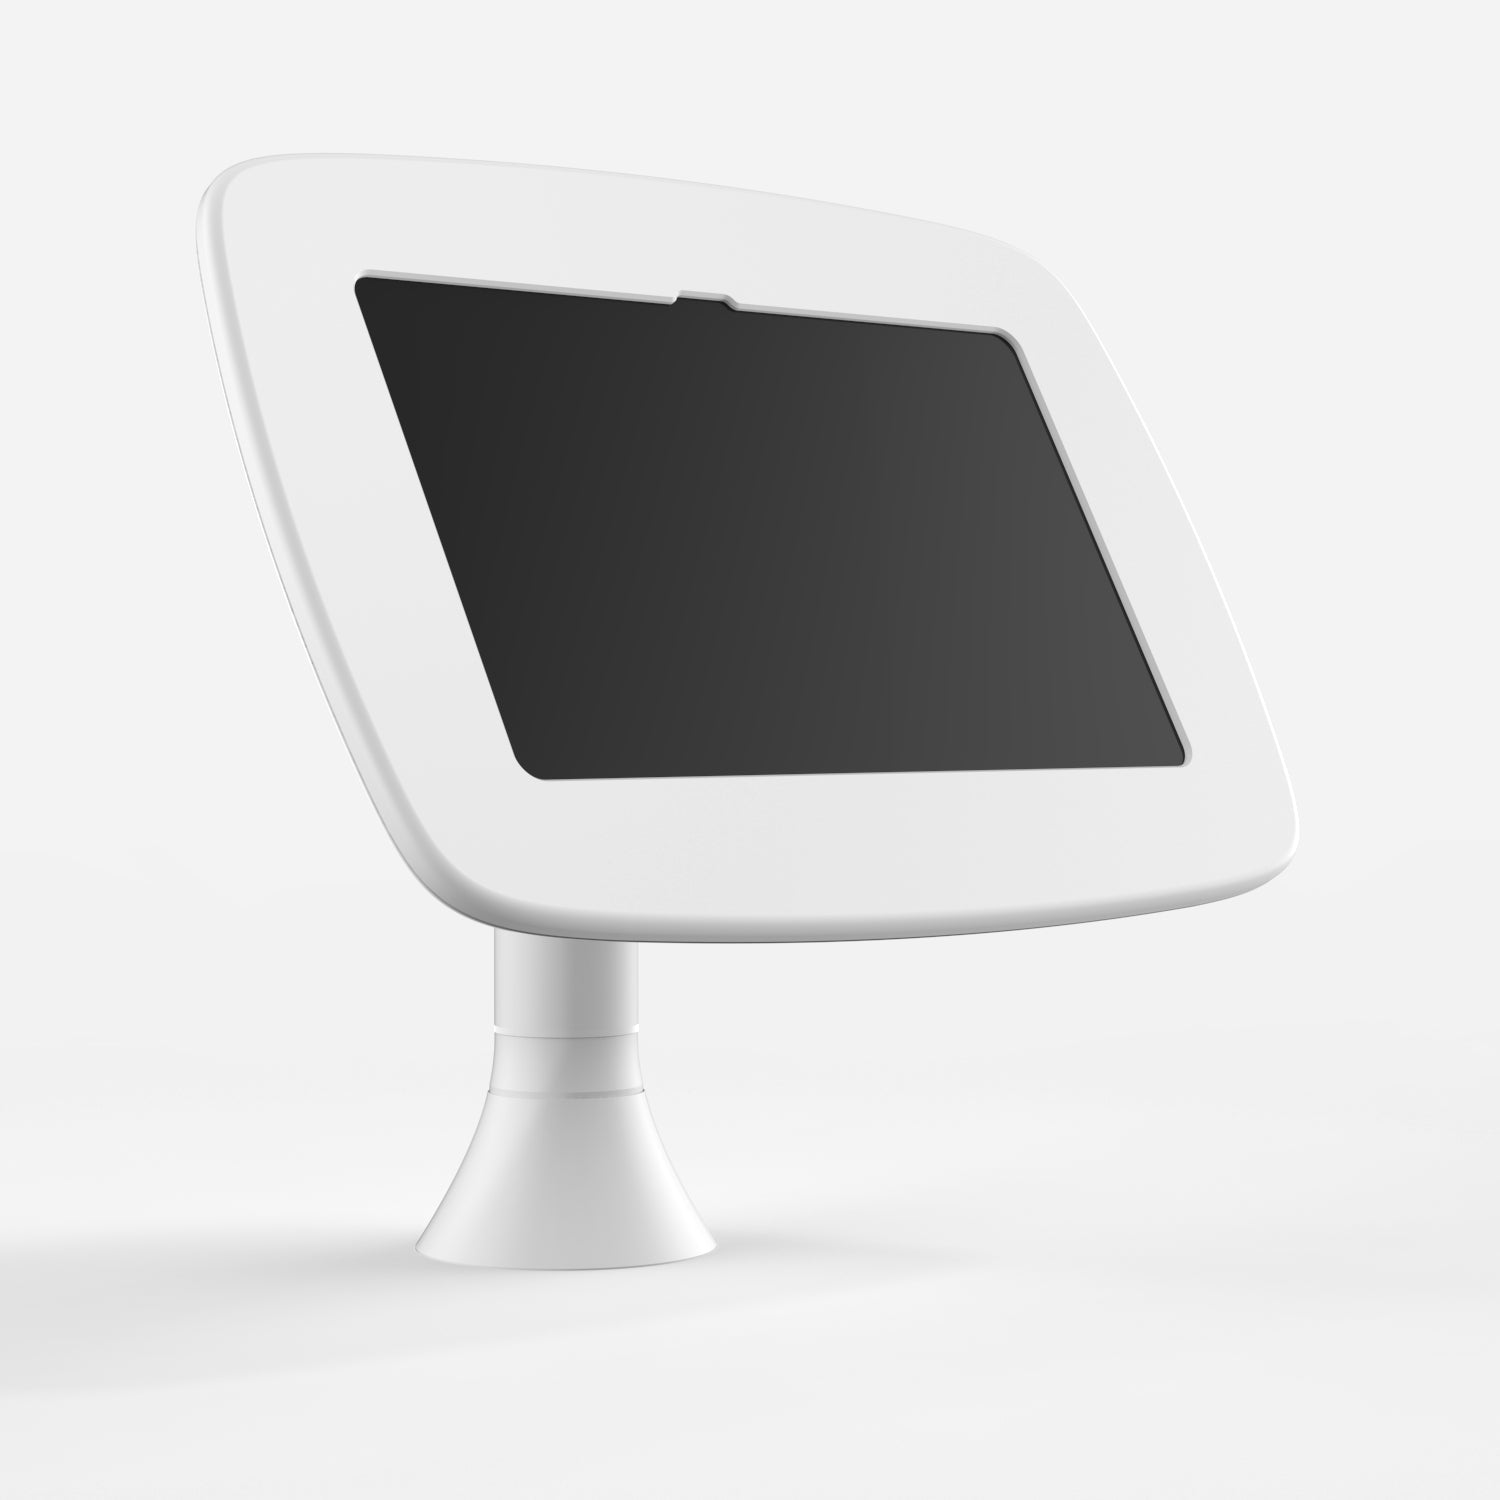 Bouncepad Sumo - A secure & adjustable tablet & iPad desk mount in white.